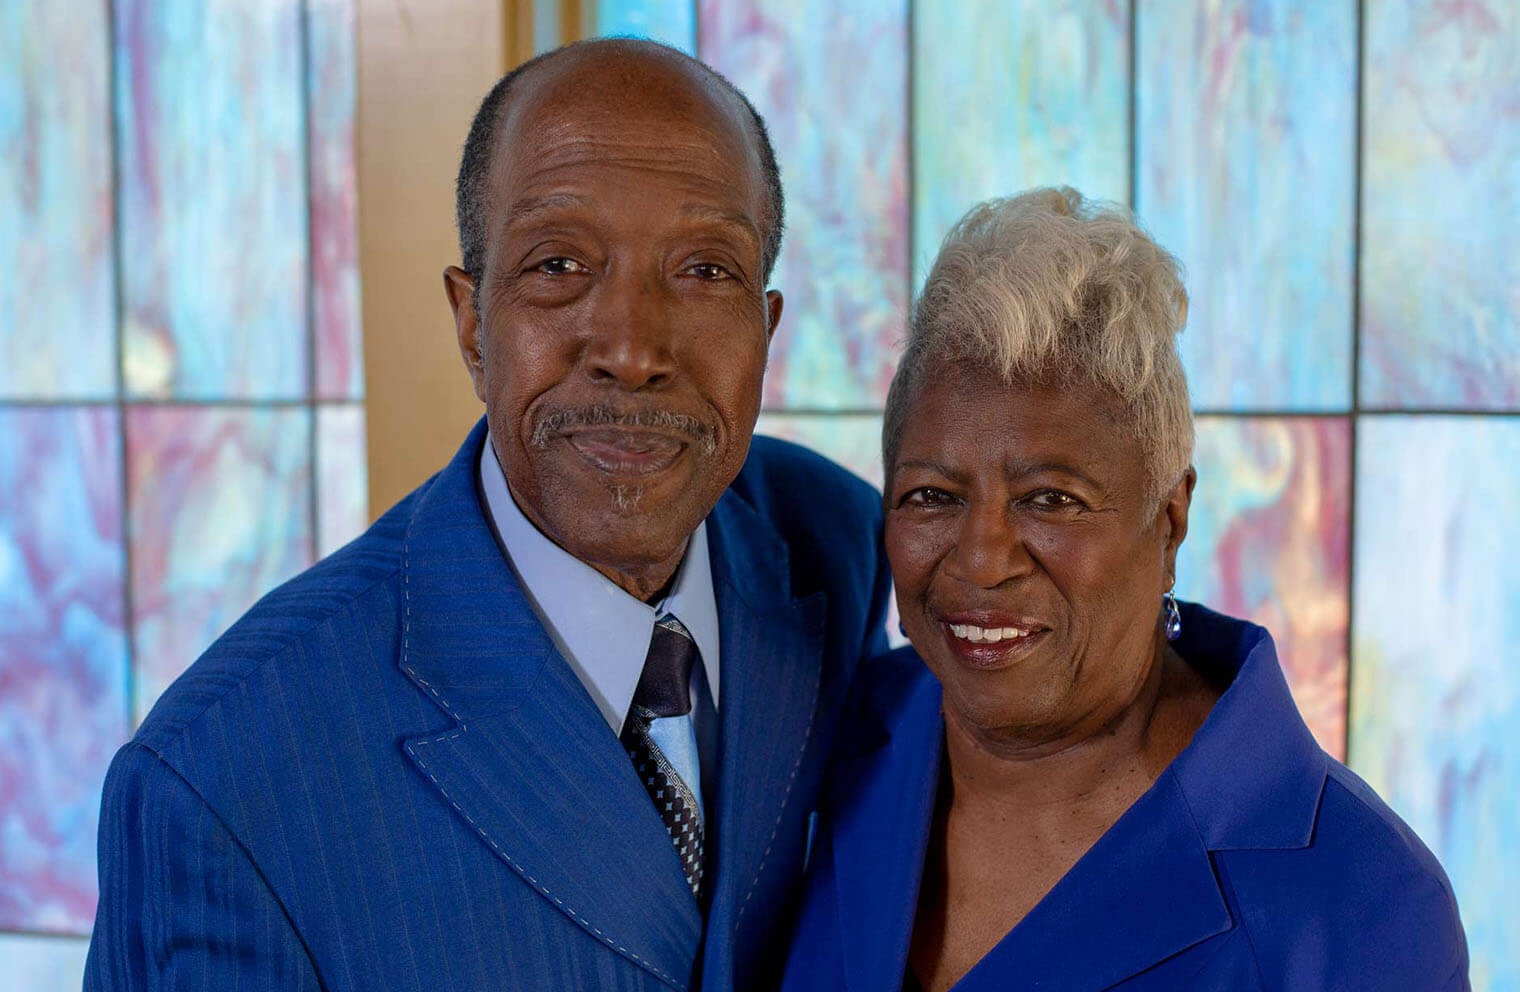 2021-01-26 Article: Riches of the Gospel, Coy and Jean Brown's Story